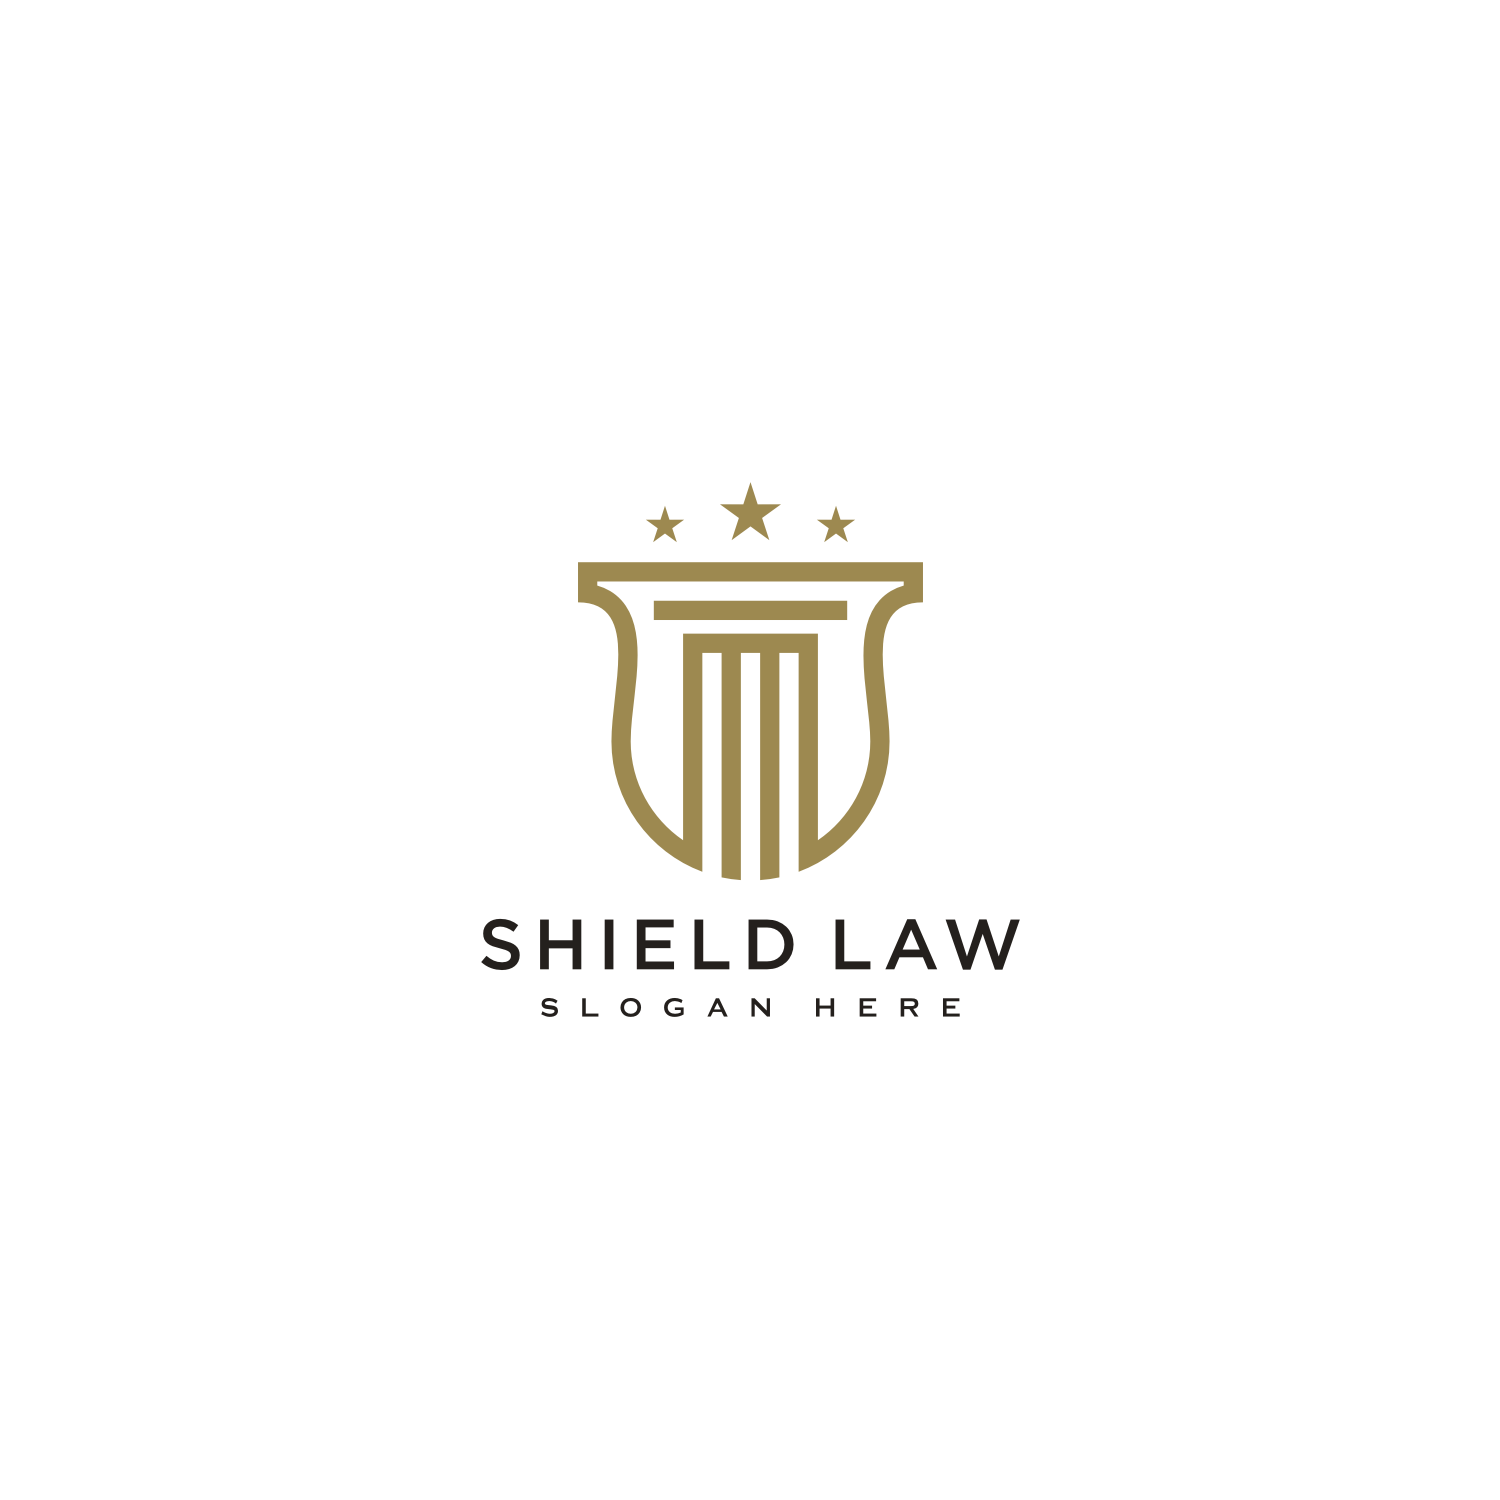 Law Firm and Shield Logo Design Vector cover image.